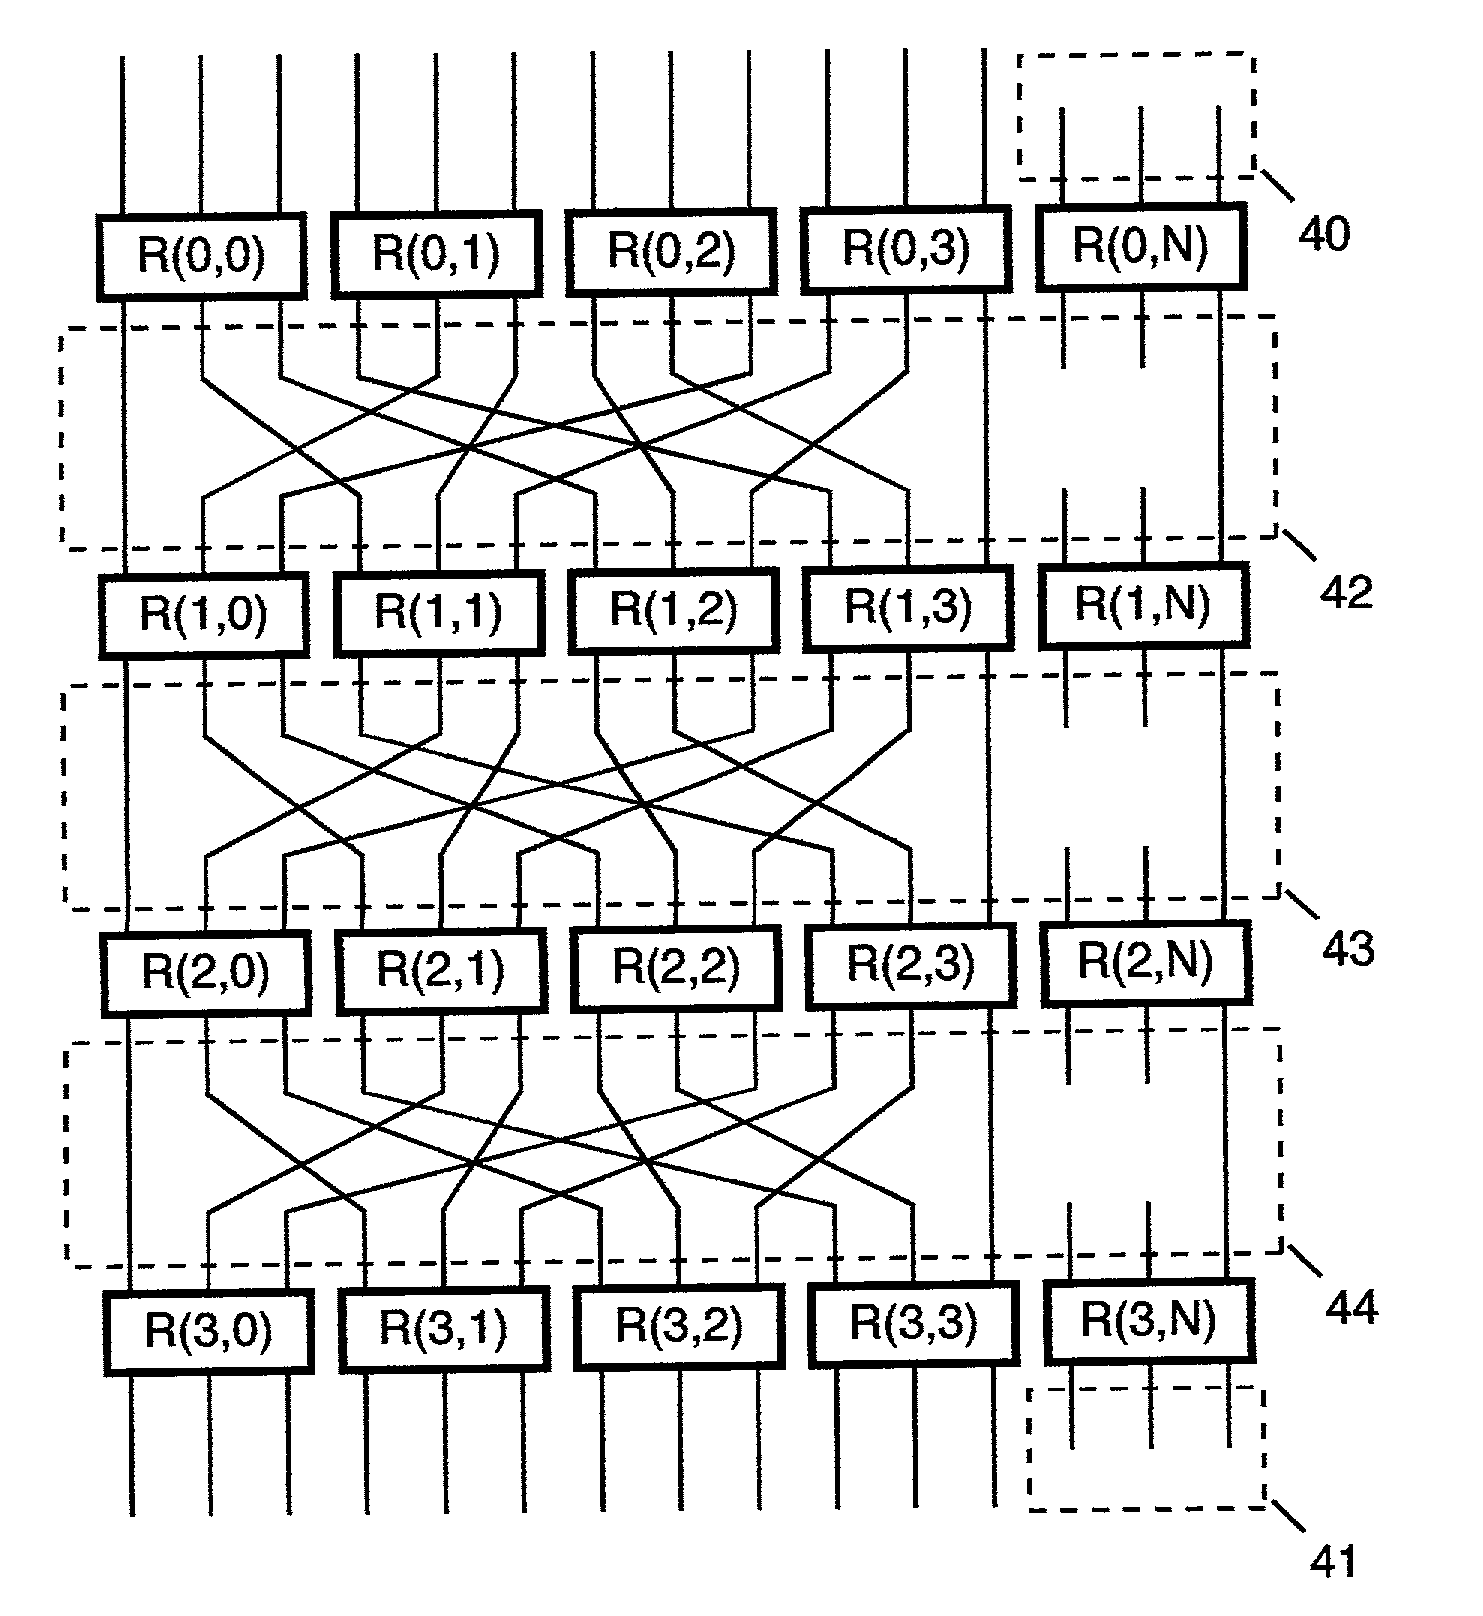 Width upgrade for a scalable switching network